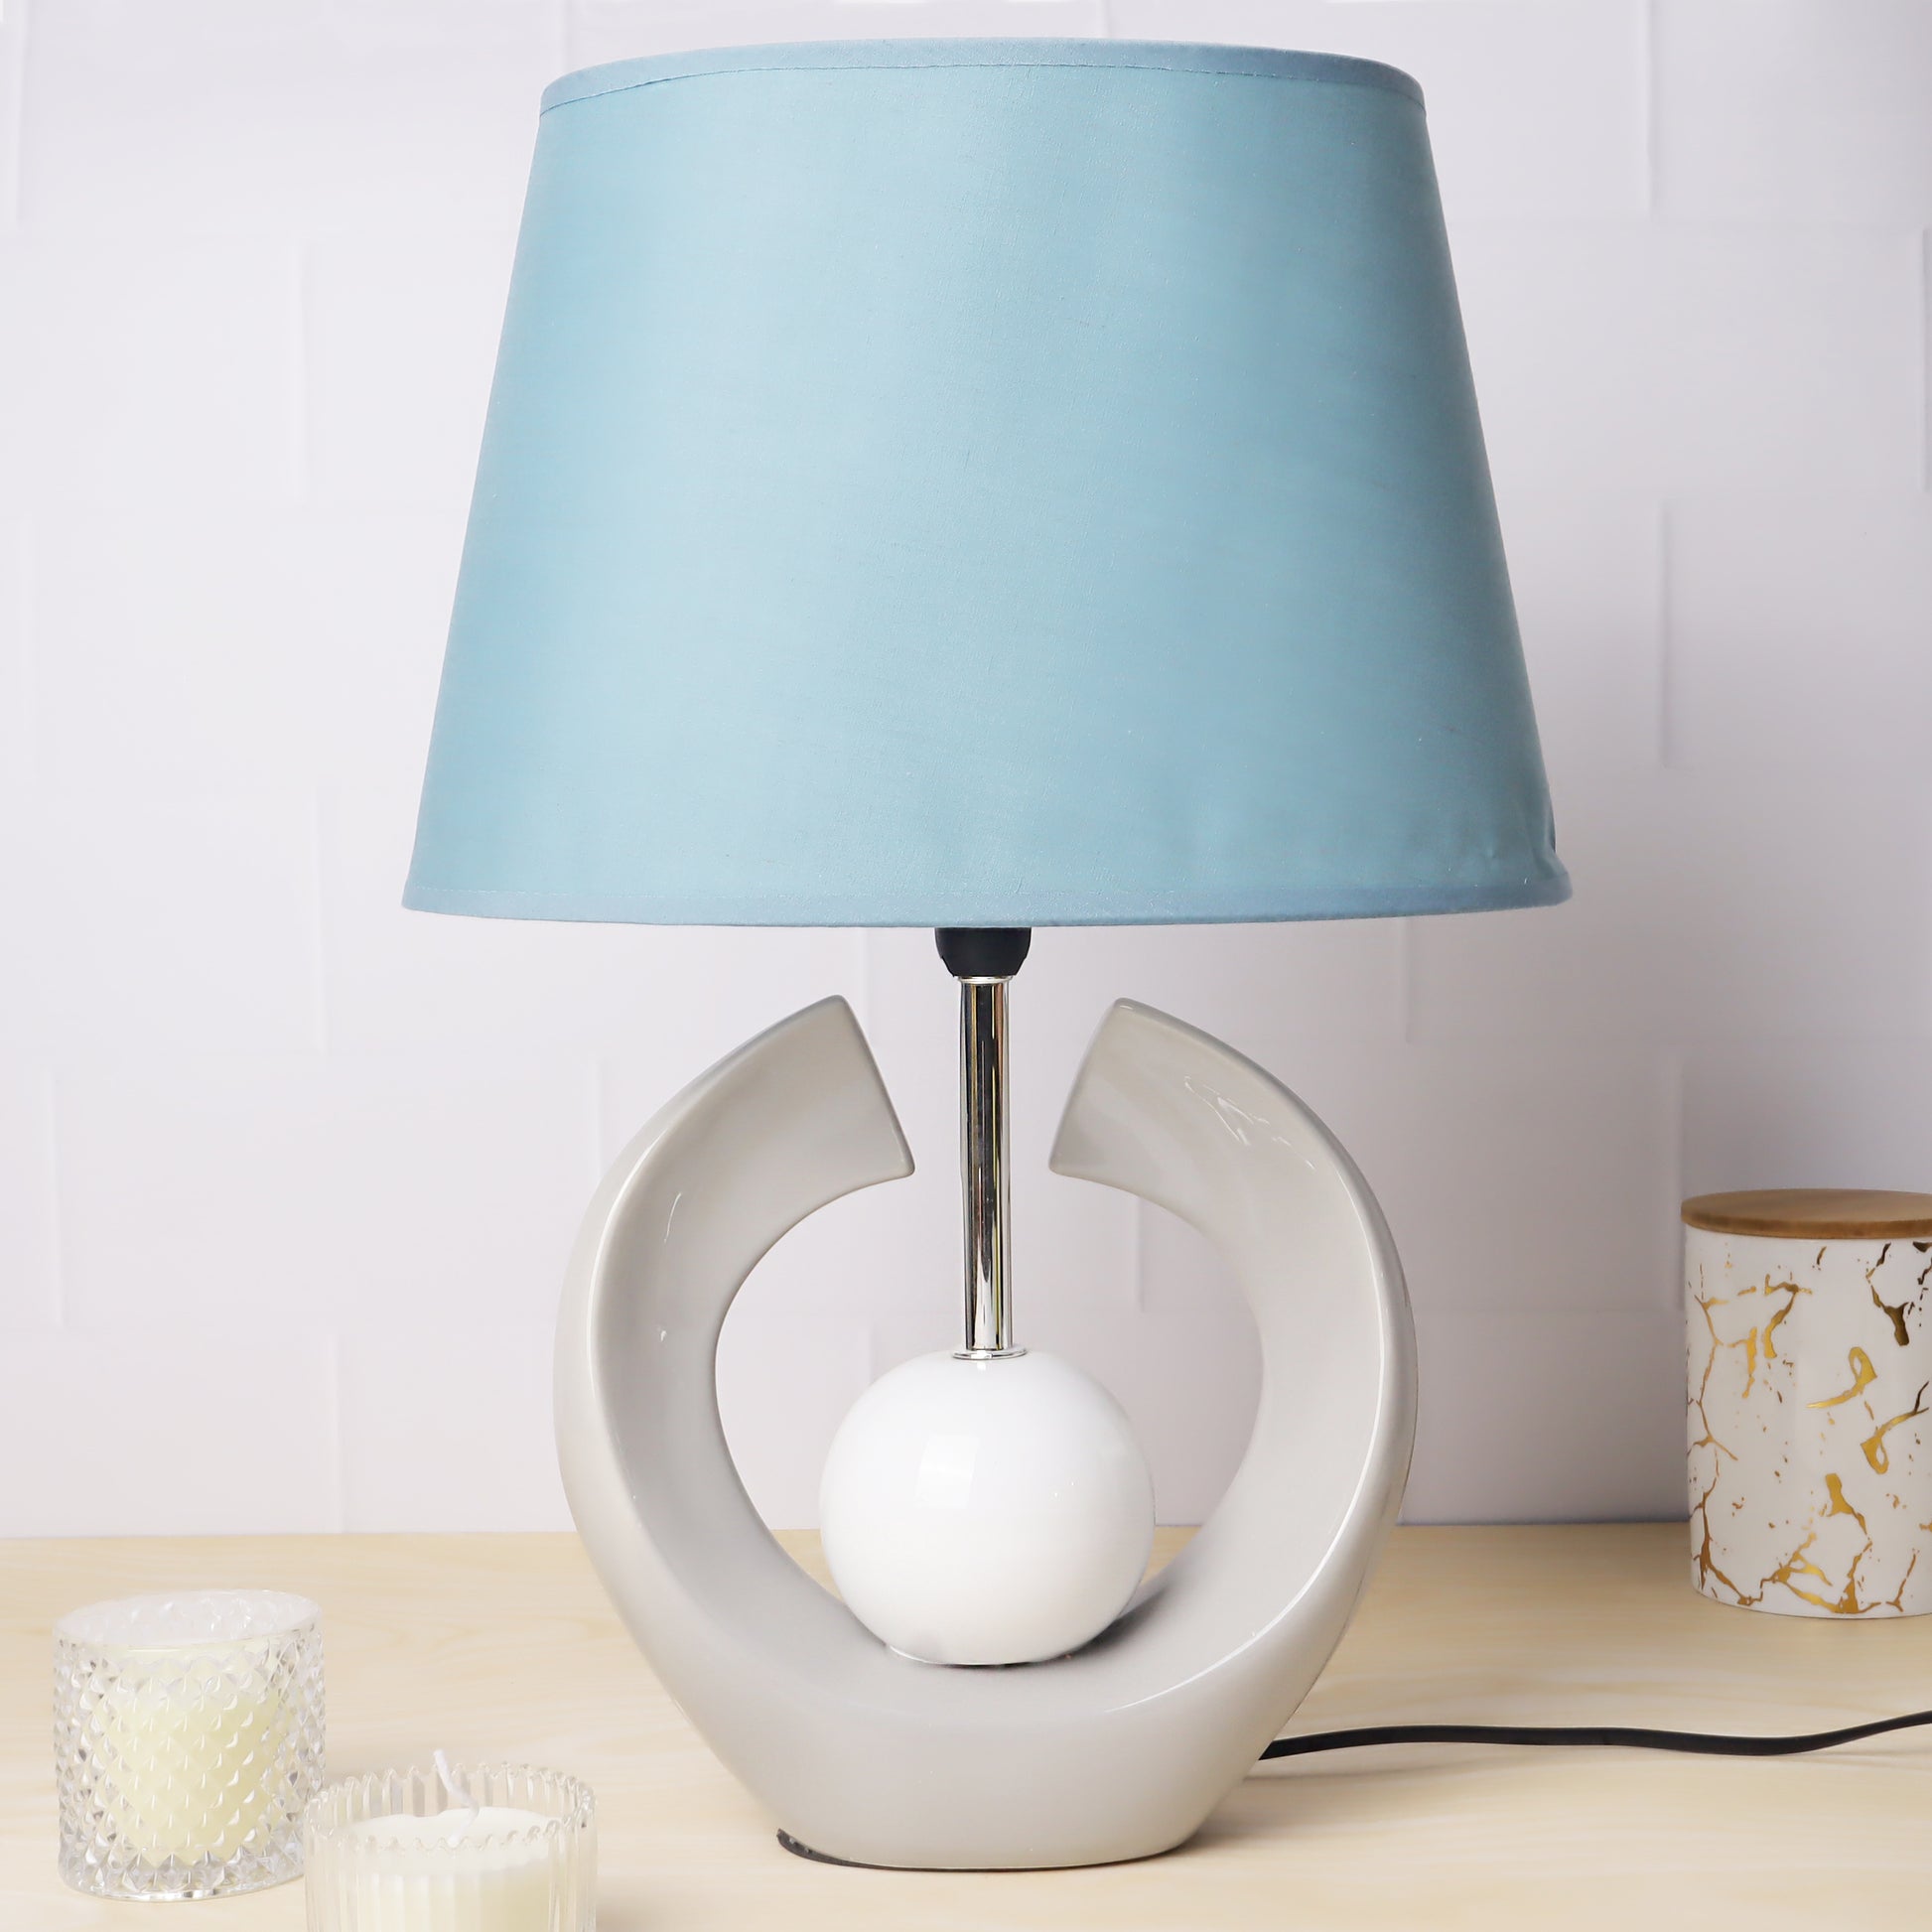  ceramic table lamp with textured base and linen shade, illuminating warmth and elegance